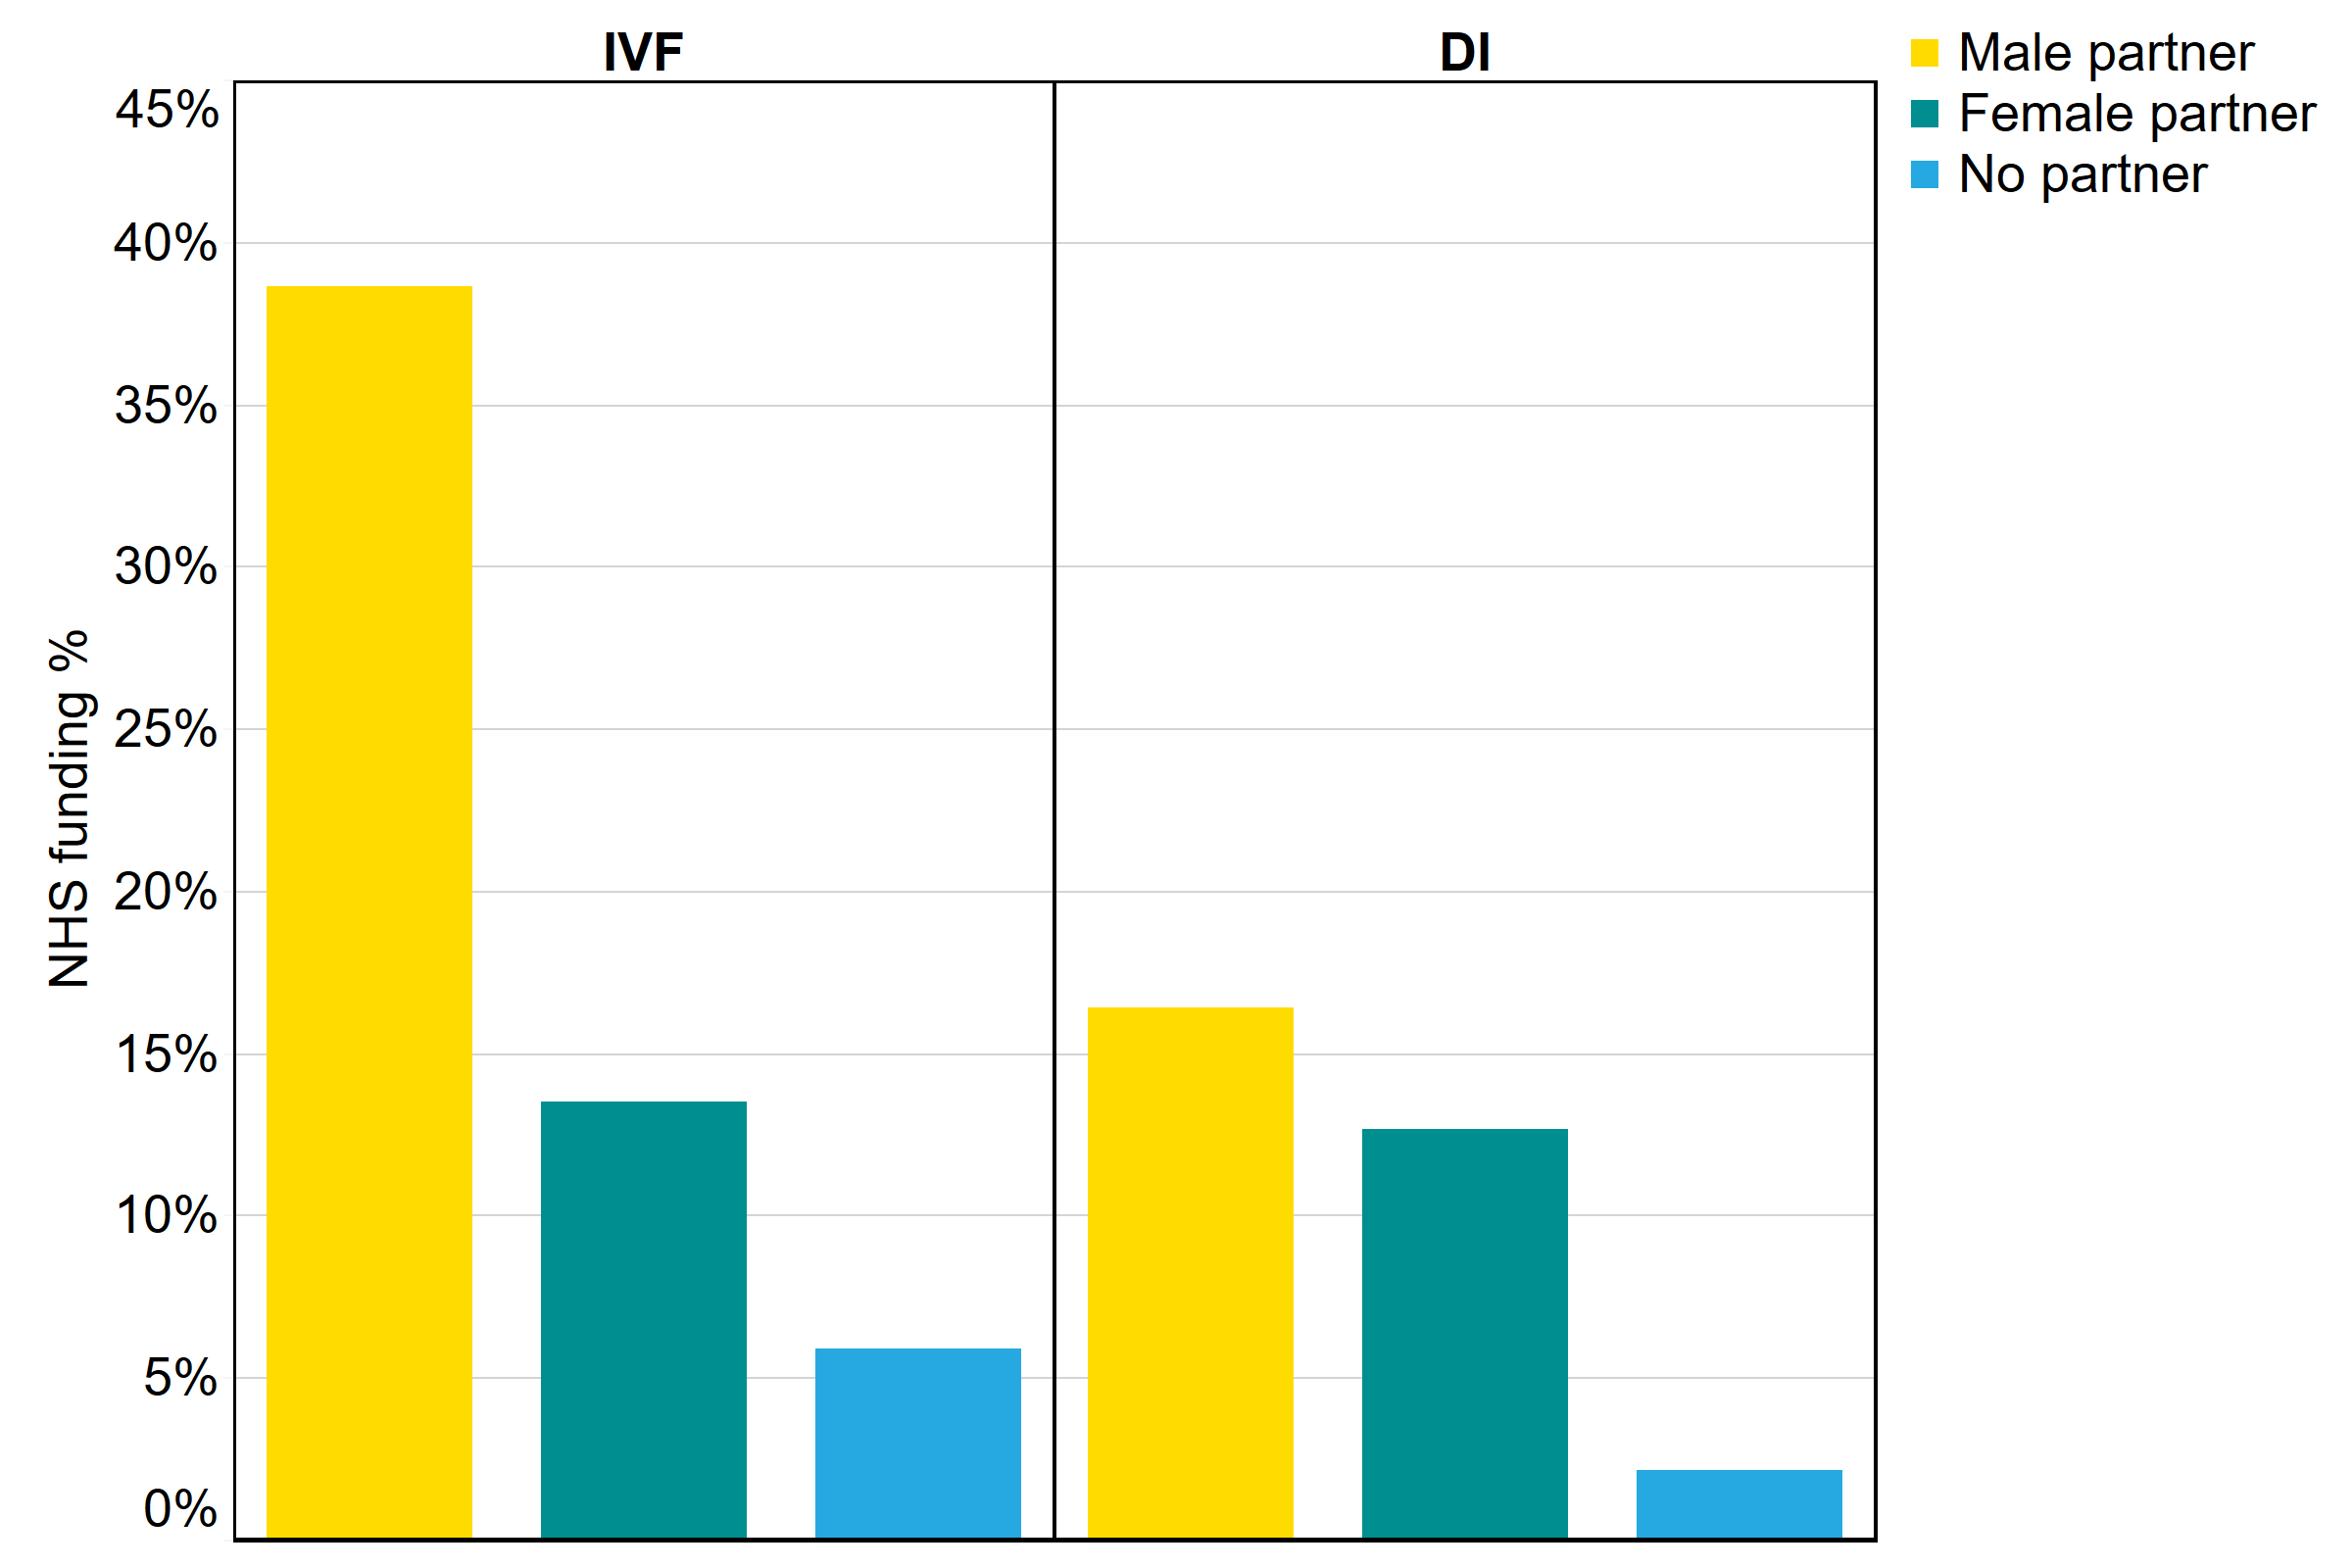 [1. Label] NHS-funding proportion for IVF and DI cycles by partner type in UK, 2018. [2. Construction] This bar chart shows the proportion of IVF and DI cycles funded by the NHS by partner type. [3. Summary] Funded cycles were more common for patients in heterosexual relationships at 29% for IVF and 6% for DI cycles, followed by patients in female same-sex relationships at 14% for IVF and 13% for DI cycles. Single patients had the fewest proportion of cycles funded by the NHS at 6% for IVF and 2% for DI. [4. Data] Male partner IVF 39%, Male partner DI 16%, Female partner IVF 14%, Female partner DI 13%, No partner IVF 6%, No partner DI 2%.